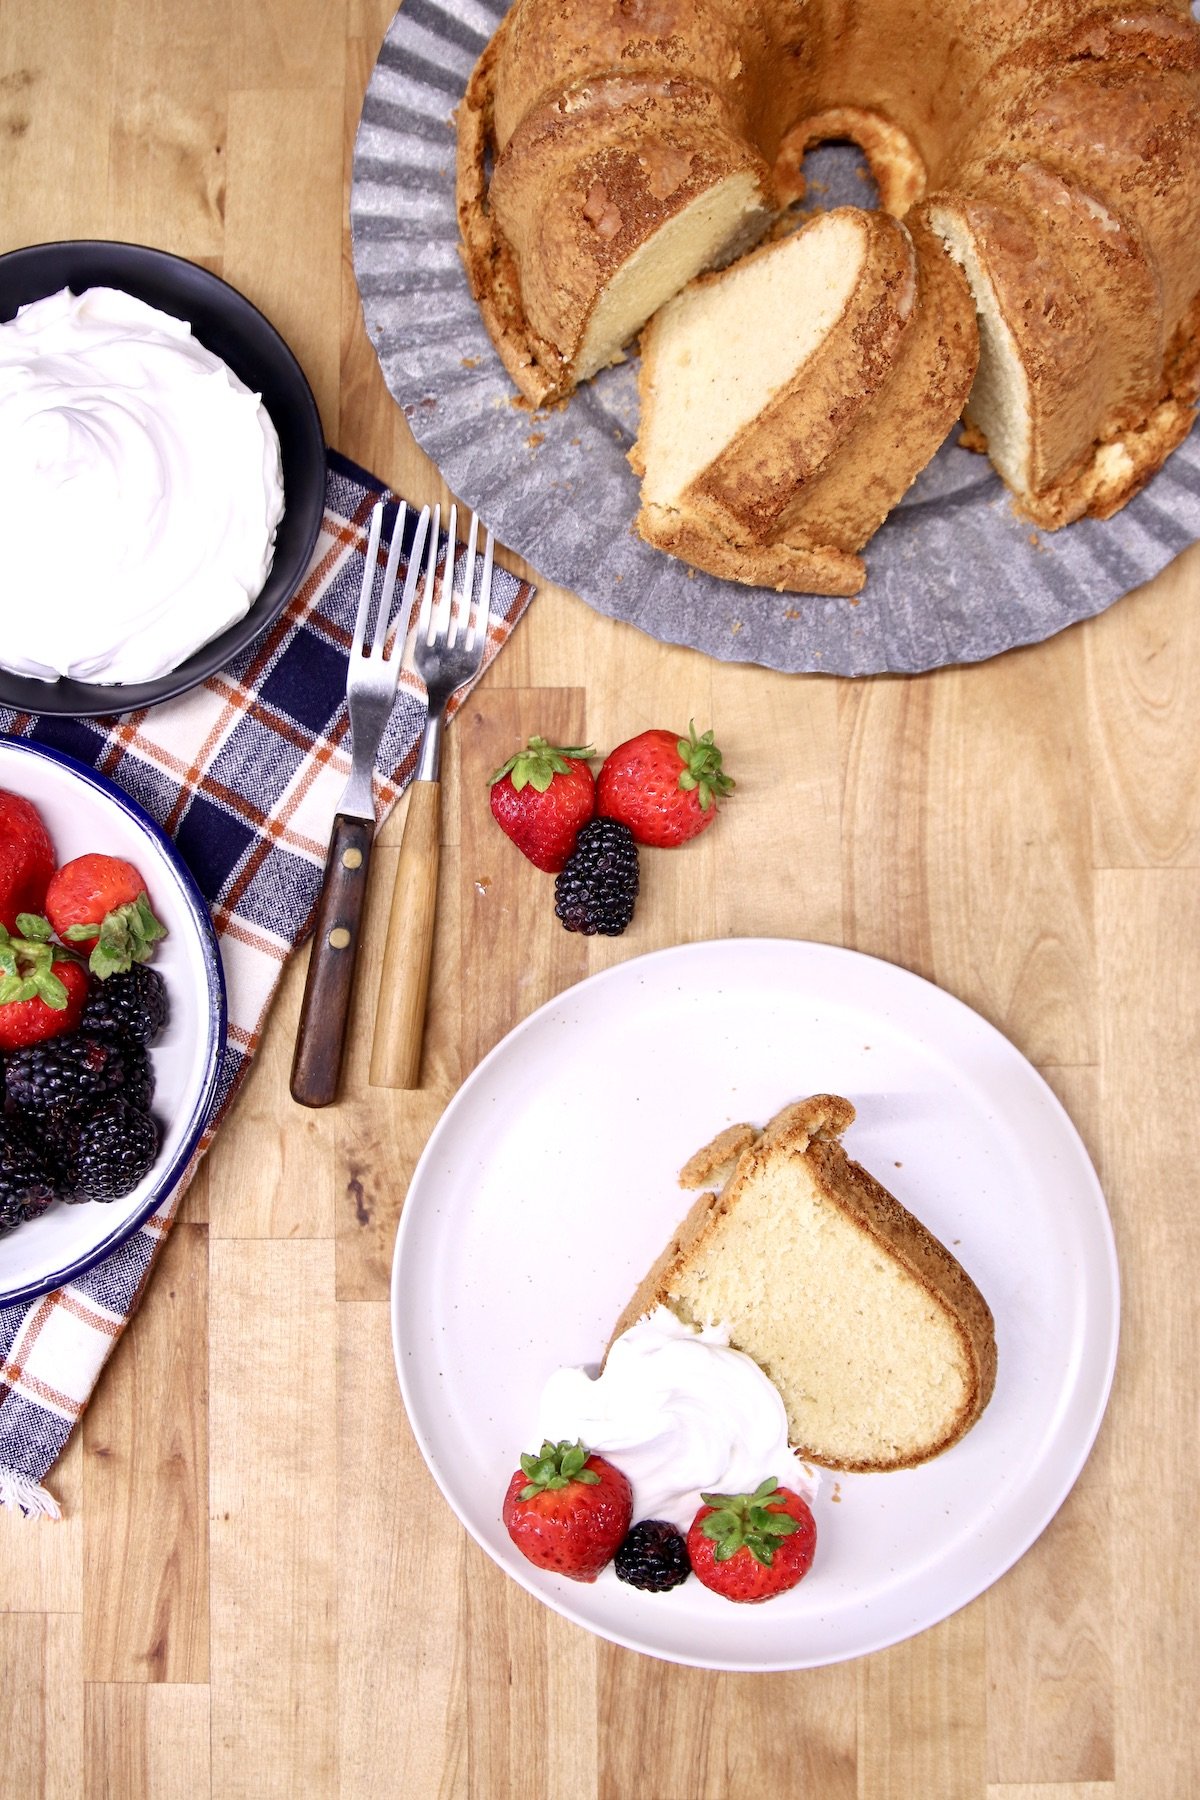 slice of pound cake with berries and whipped cream, cake on platter, bowls of whipped cream, berries